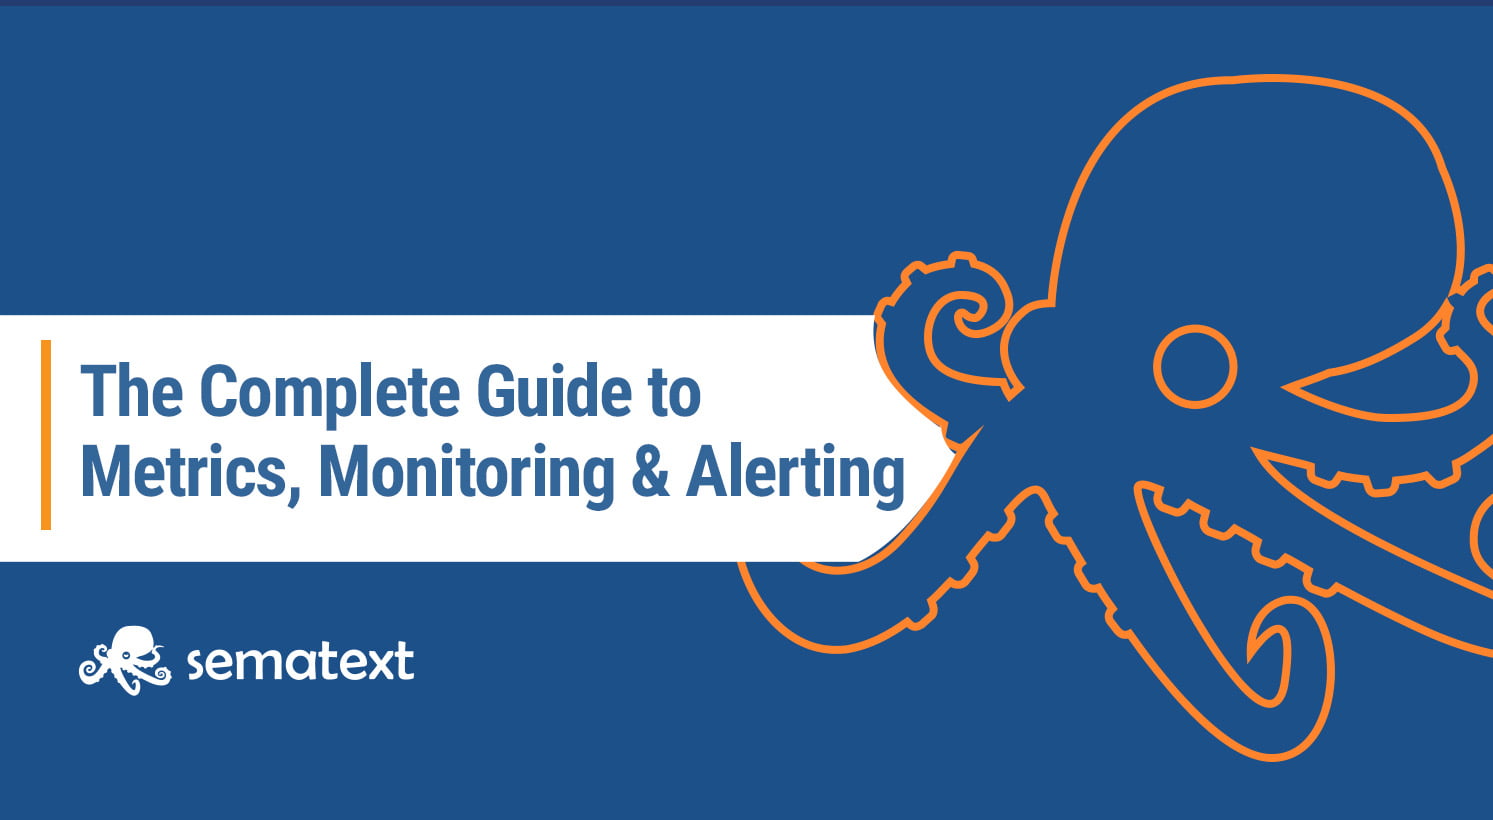 The Complete Guide to Metrics, Alerting and Monitoring - Sematext